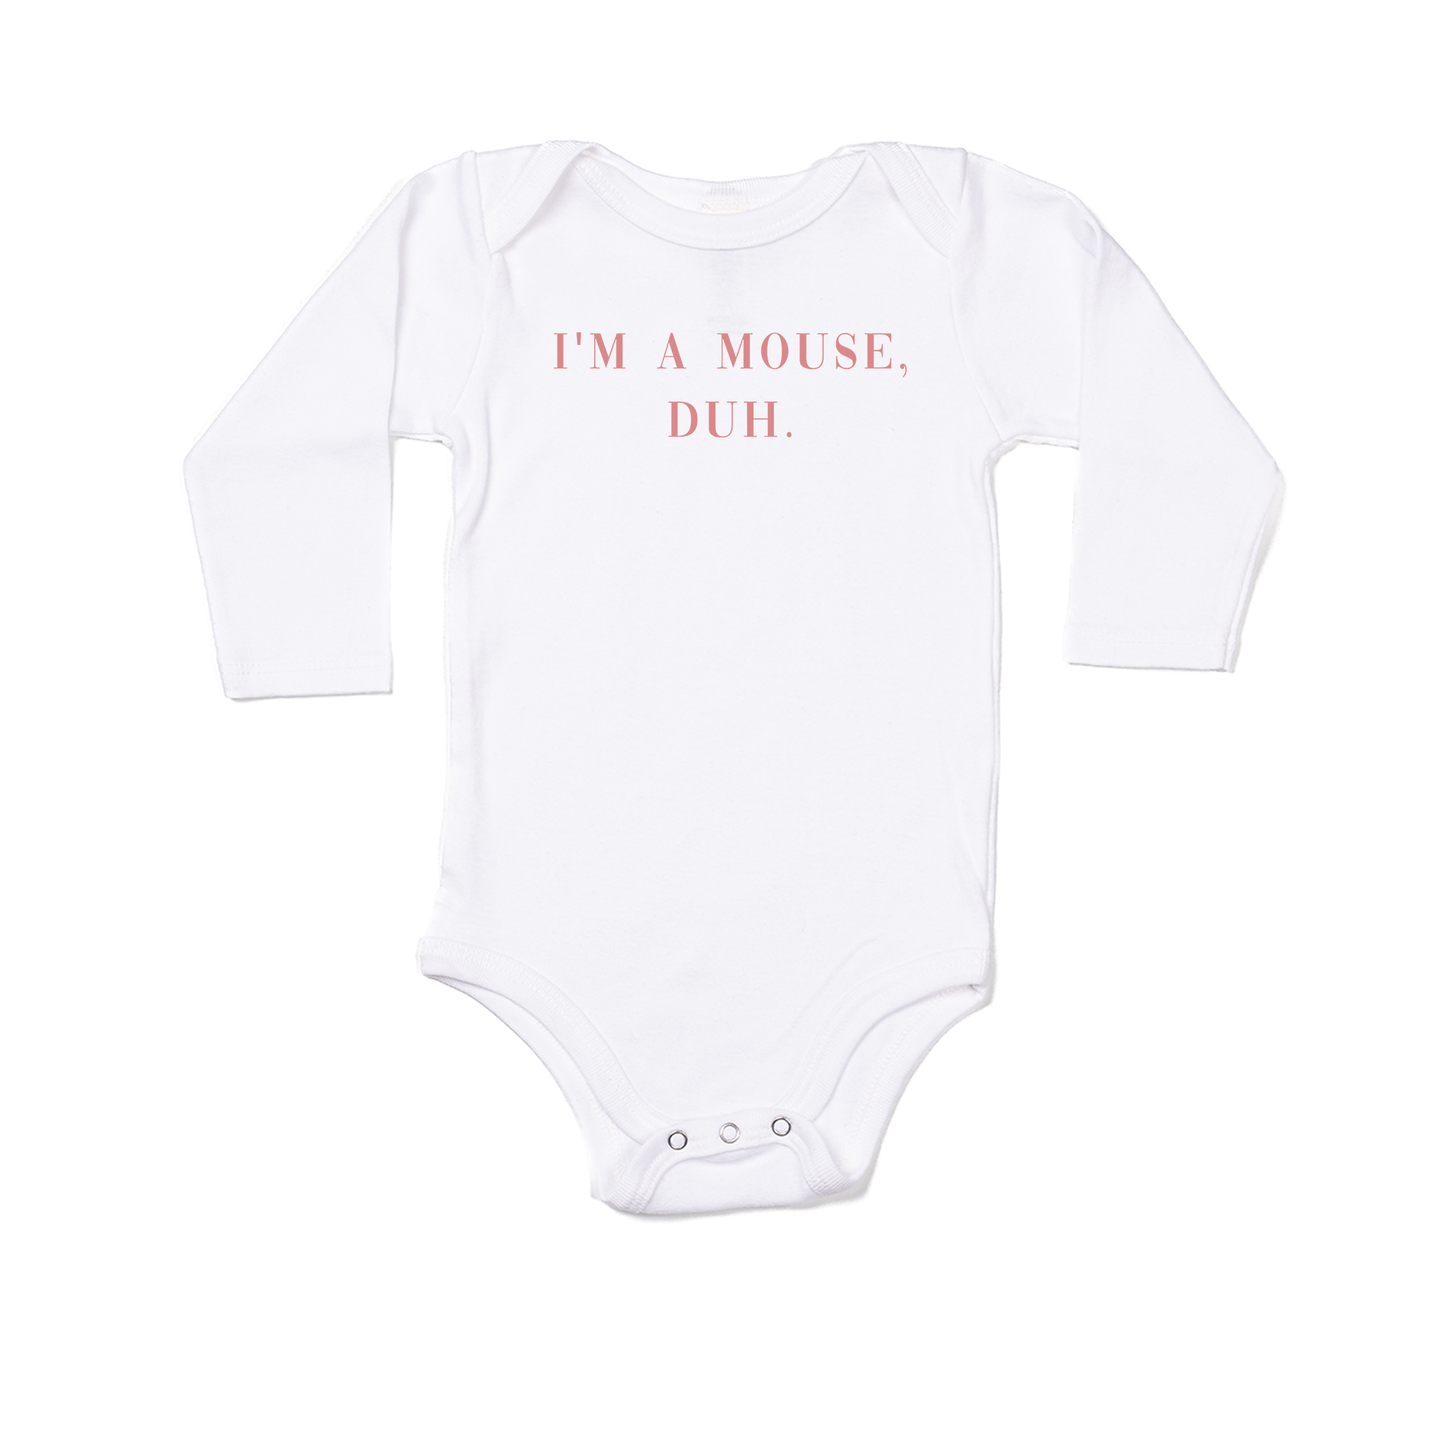 I'm a mouse, duh. (Pink) - Bodysuit (White, Long Sleeve)